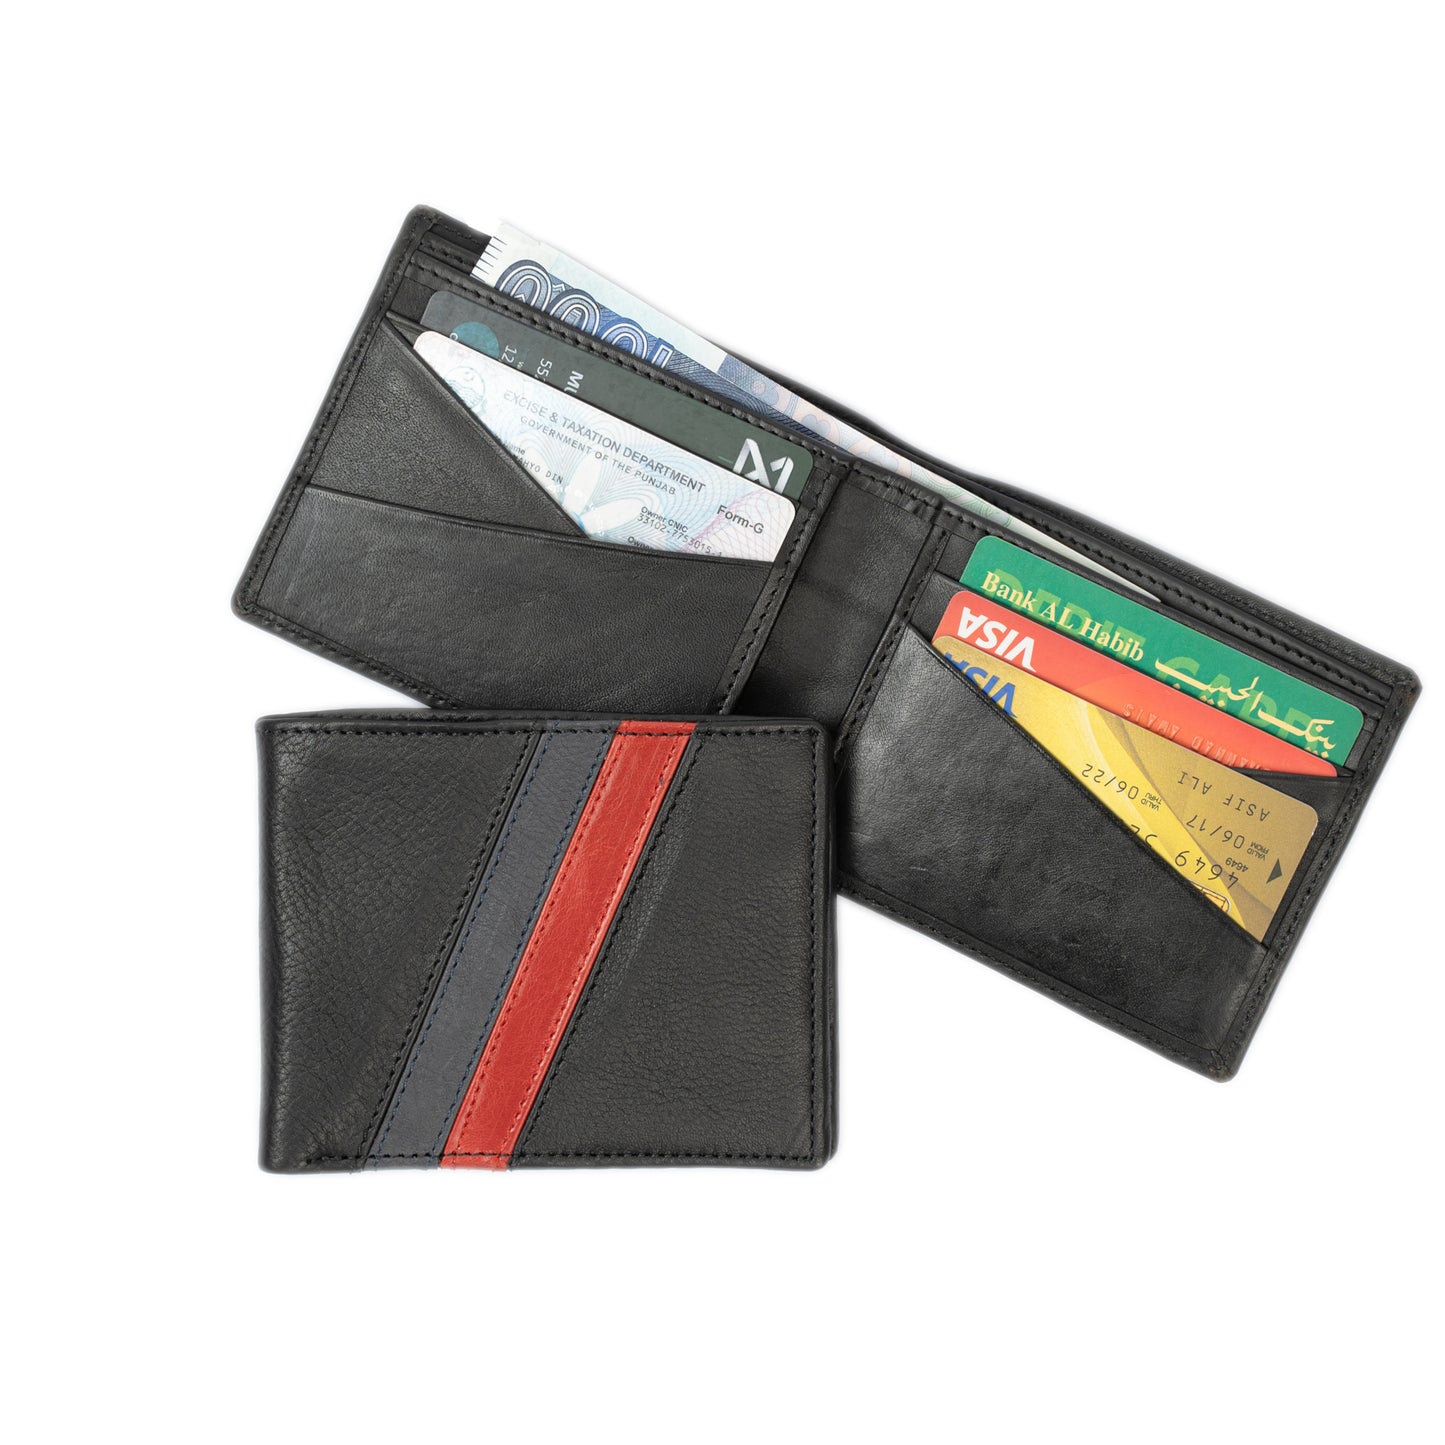 "Artisanal Mastery: Handcrafted Leather Wallet"